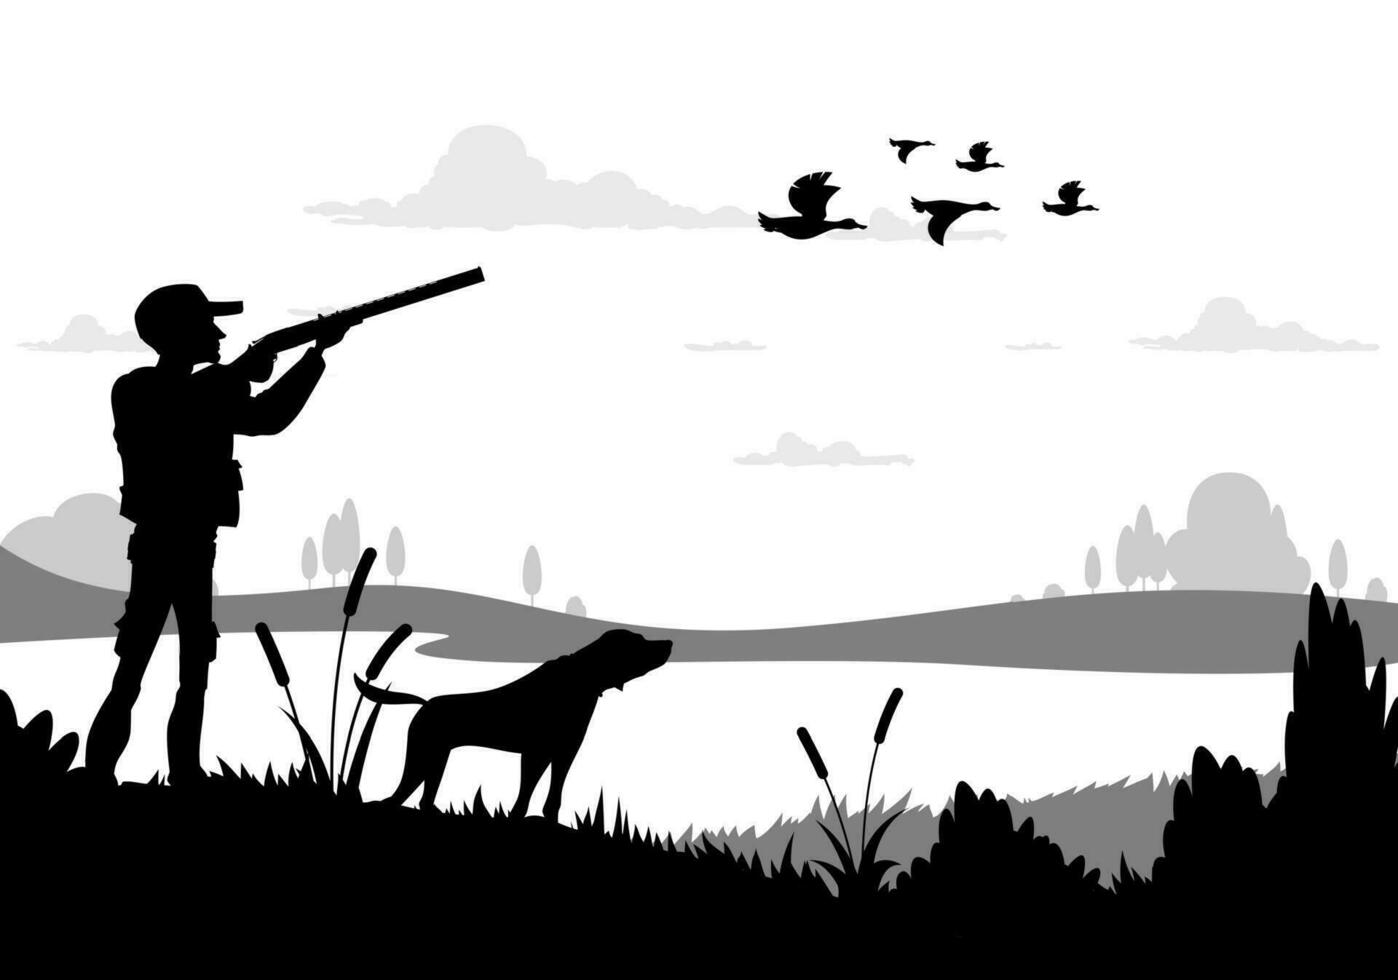 Hunting silhouette, hunter with shotgun, dog, duck vector